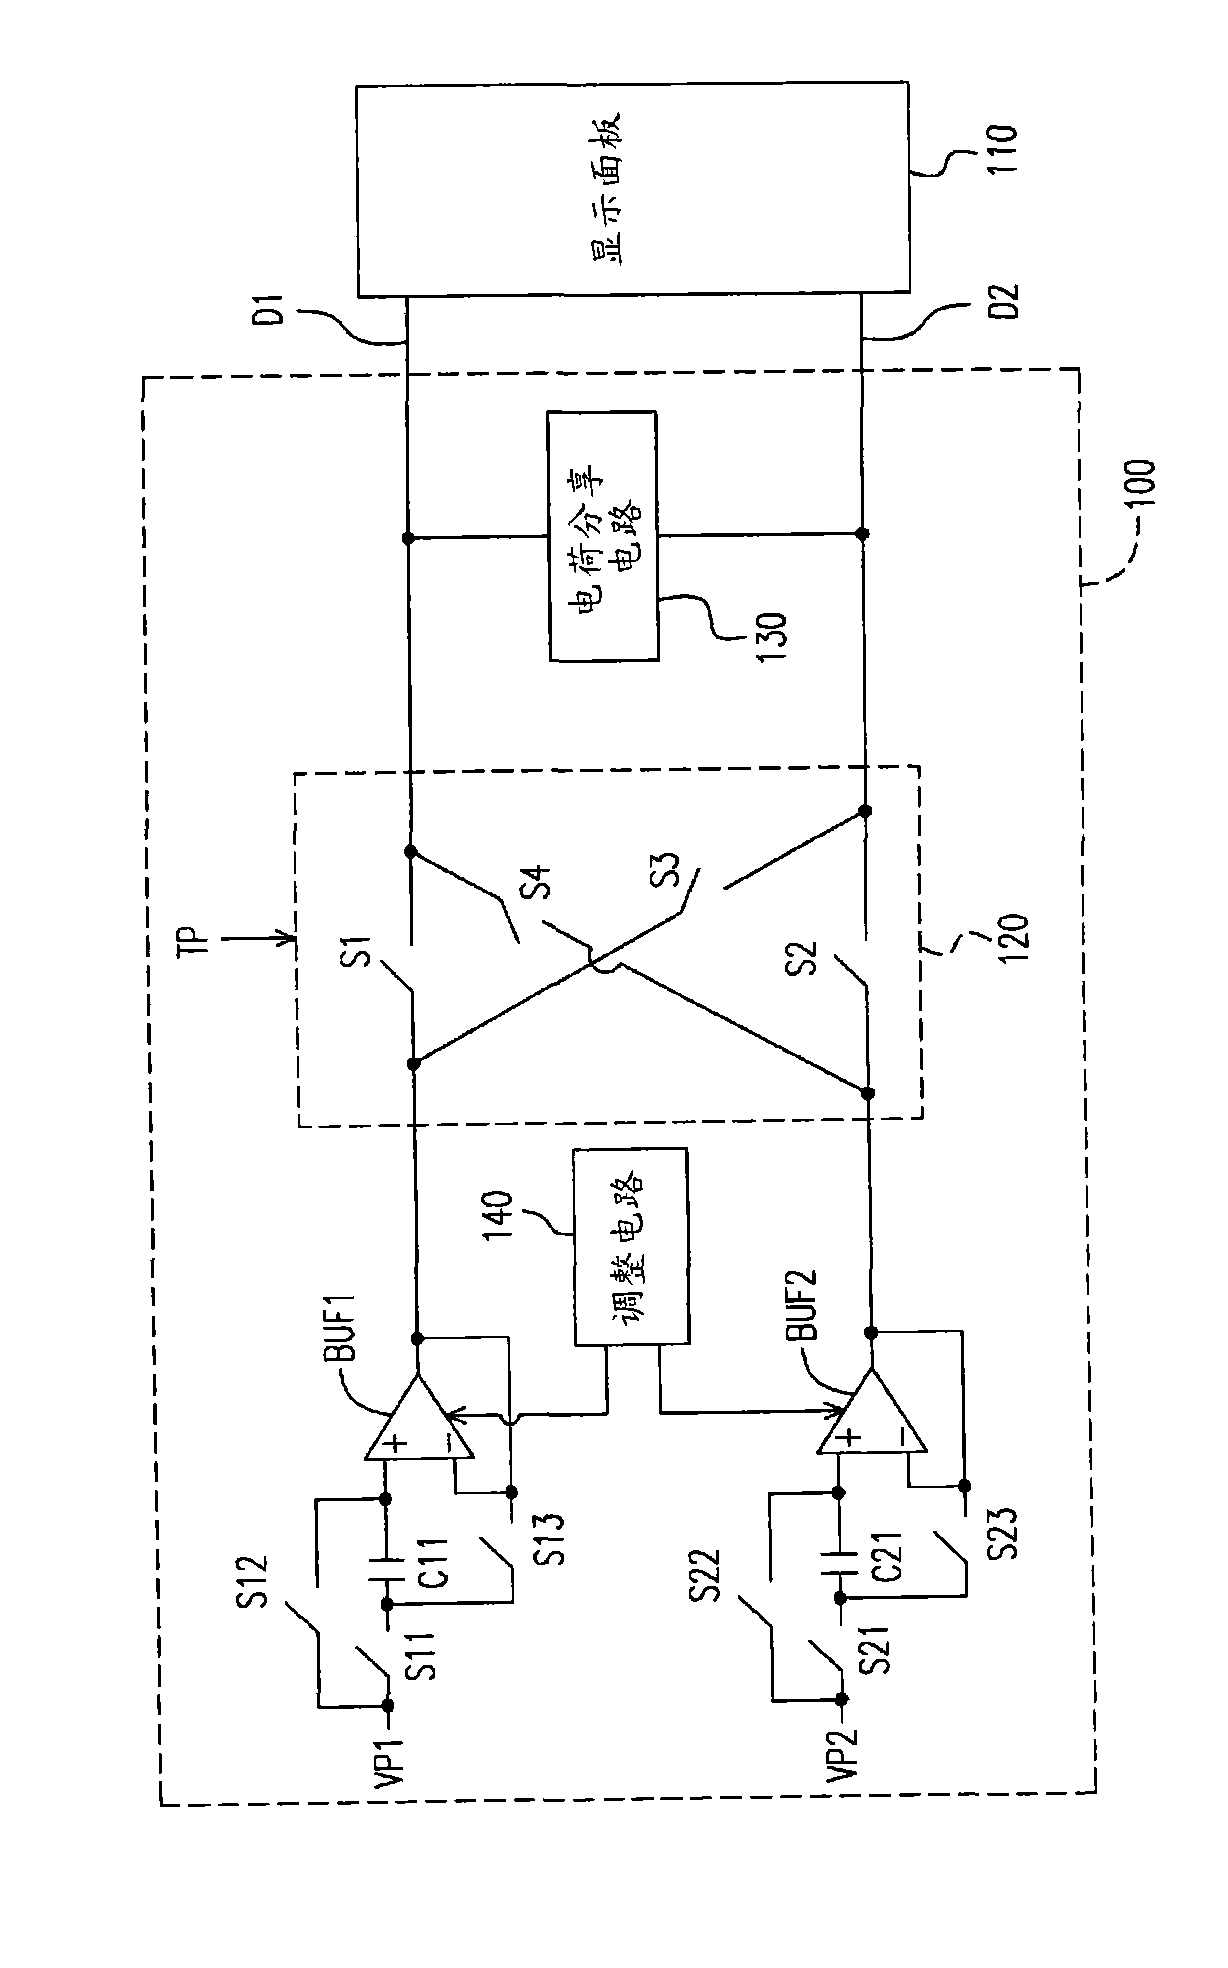 Source driver and compensation method for offset voltage of output buffer thereof